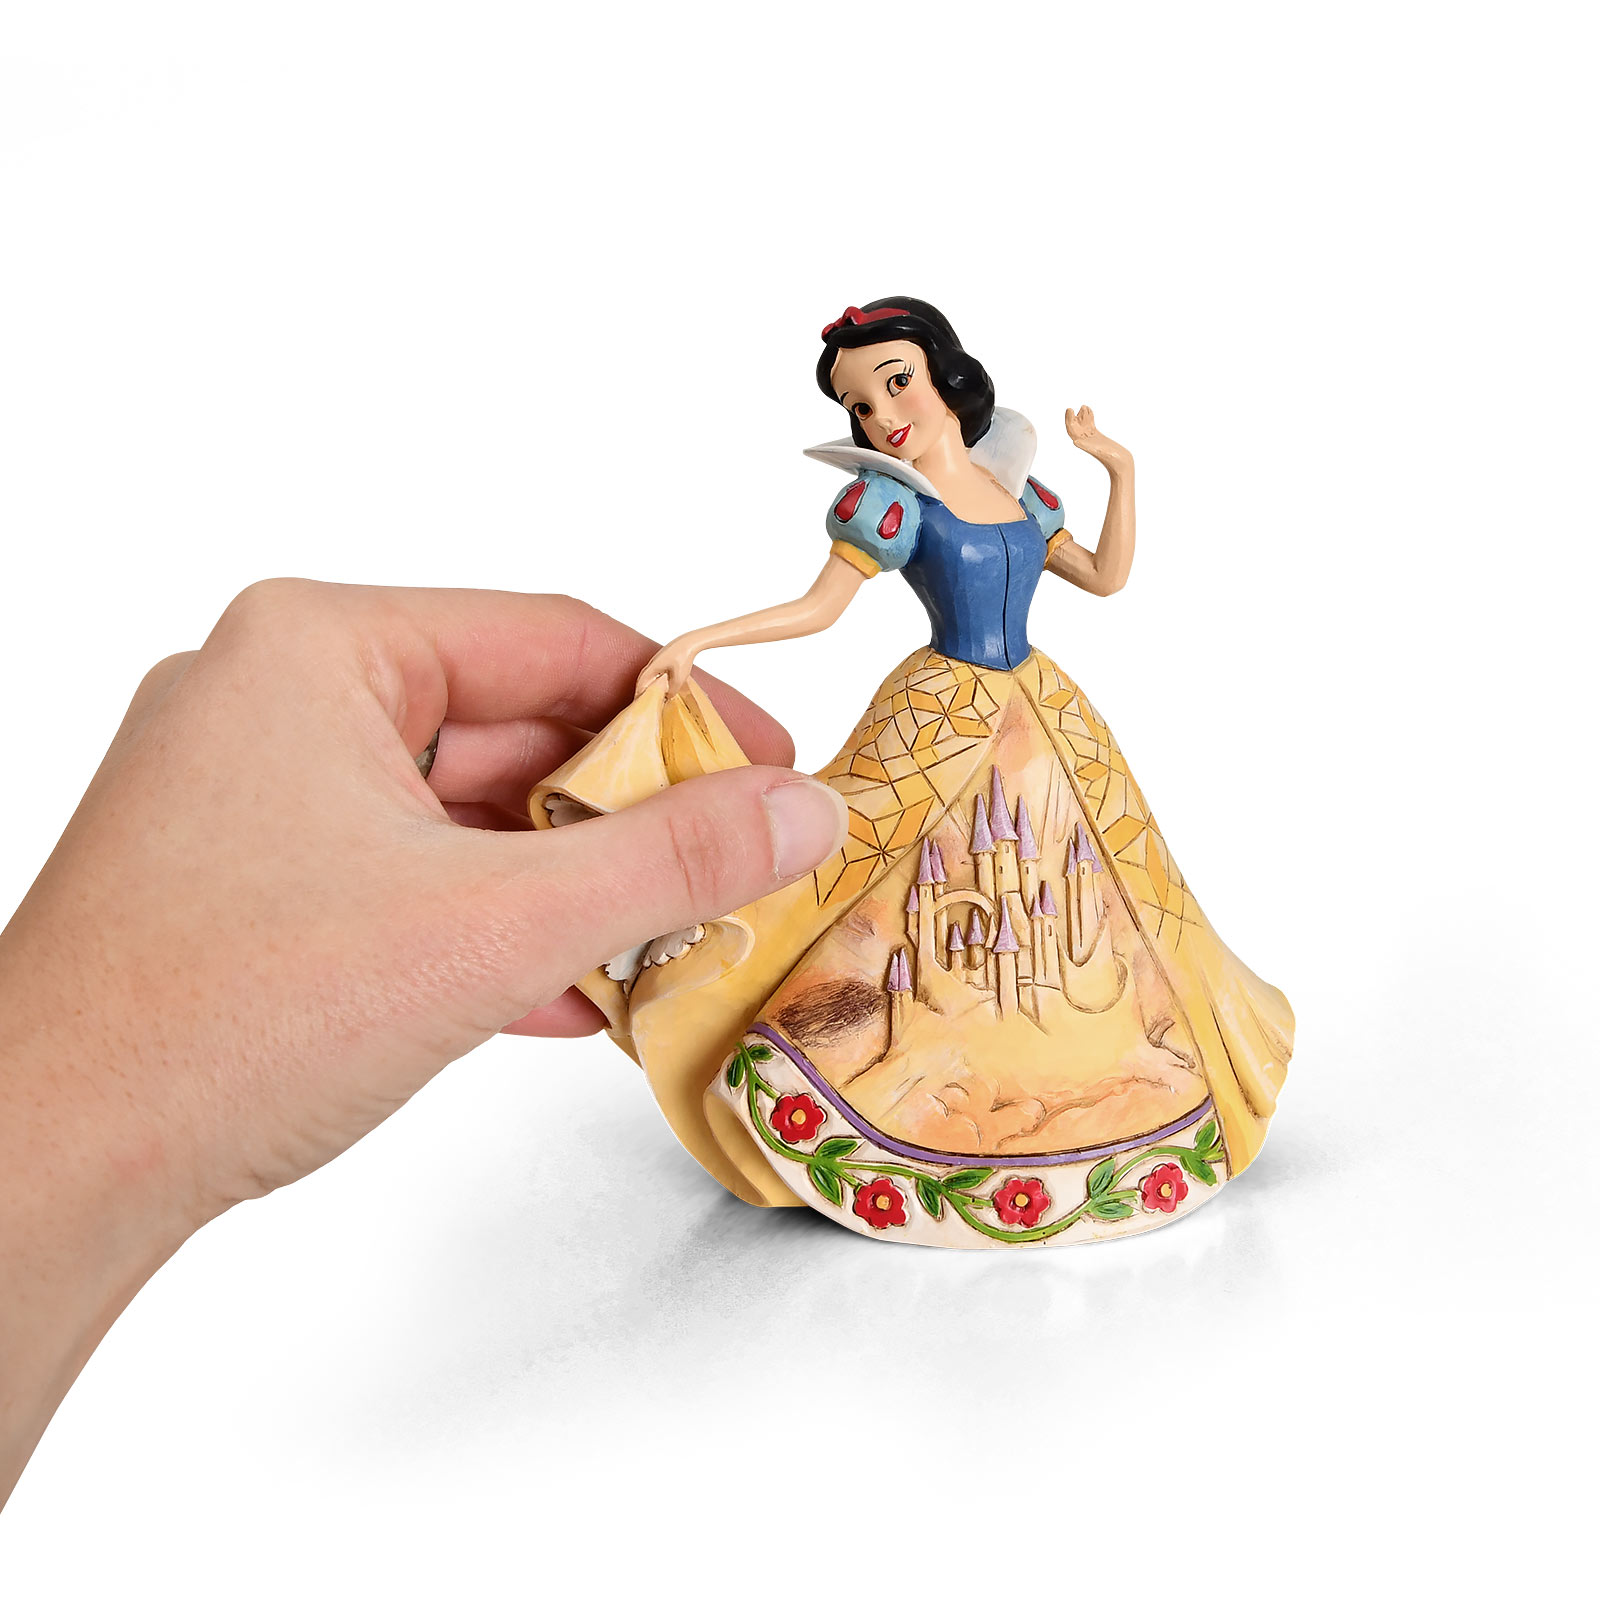 Snow White - Castle in the Clouds figure